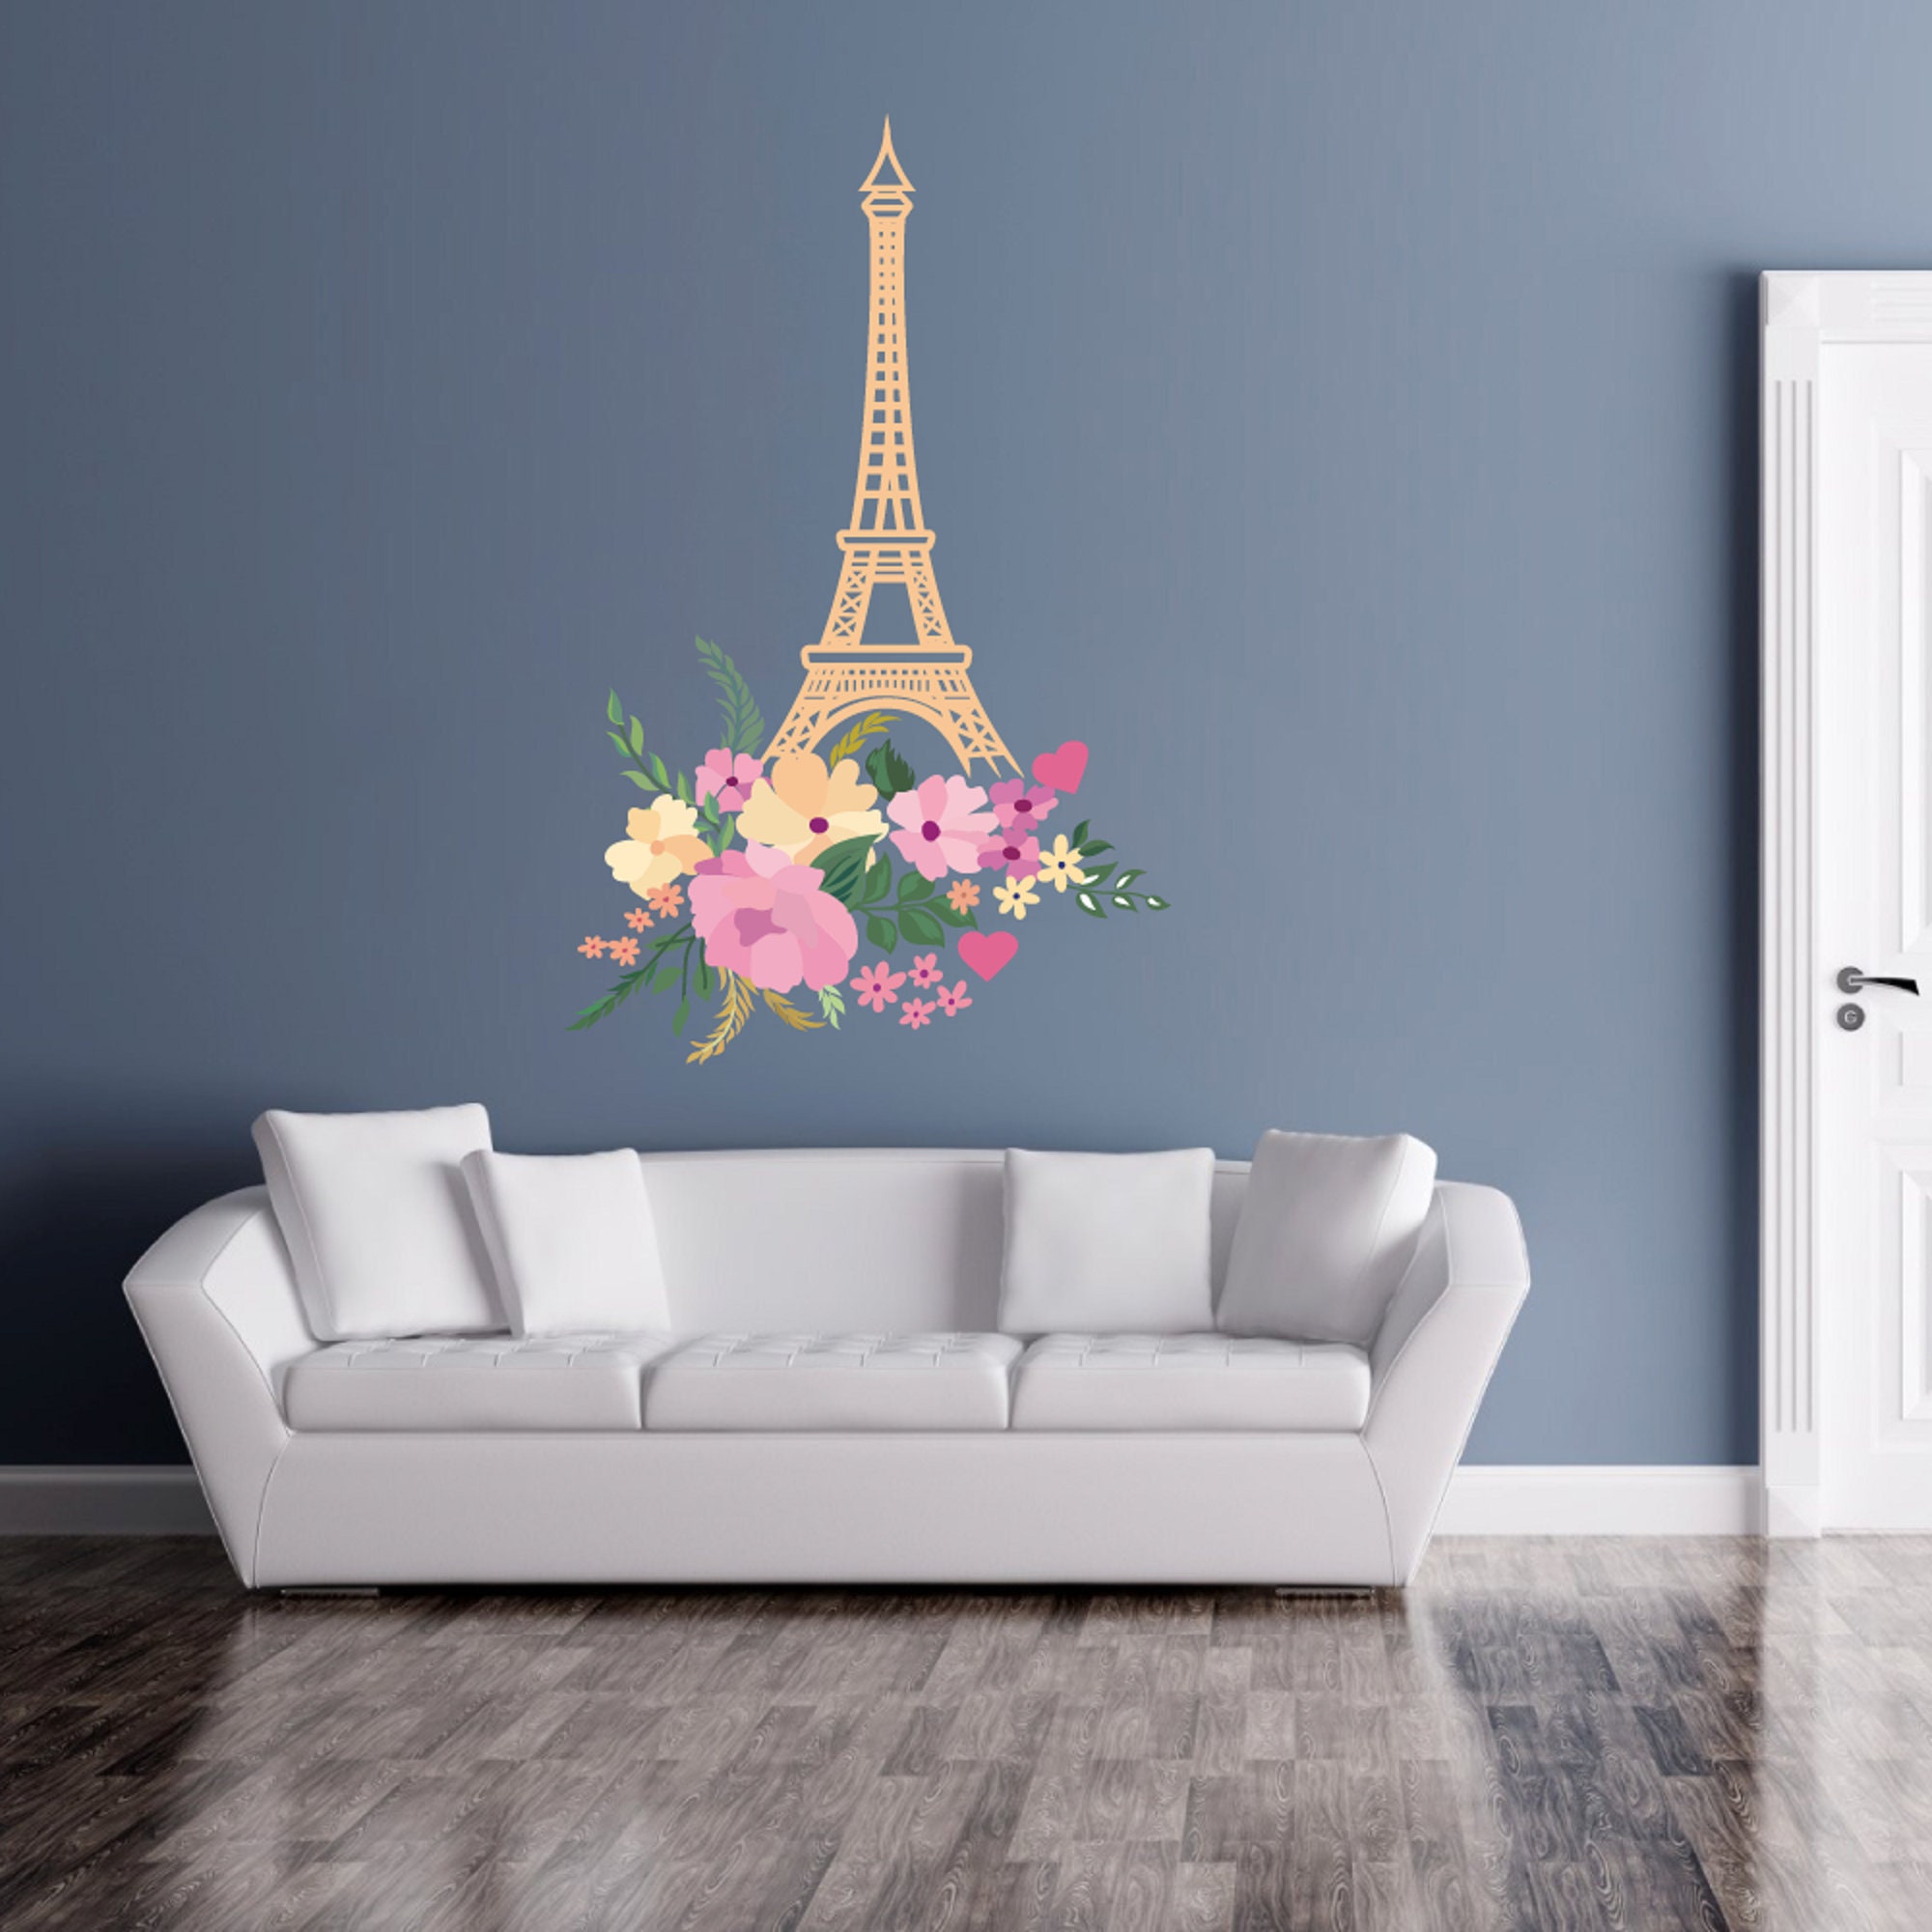 Home Bedroom Living Room Eiffel Tower Decoration Vinyl Cherry Blossom Wall  Decal